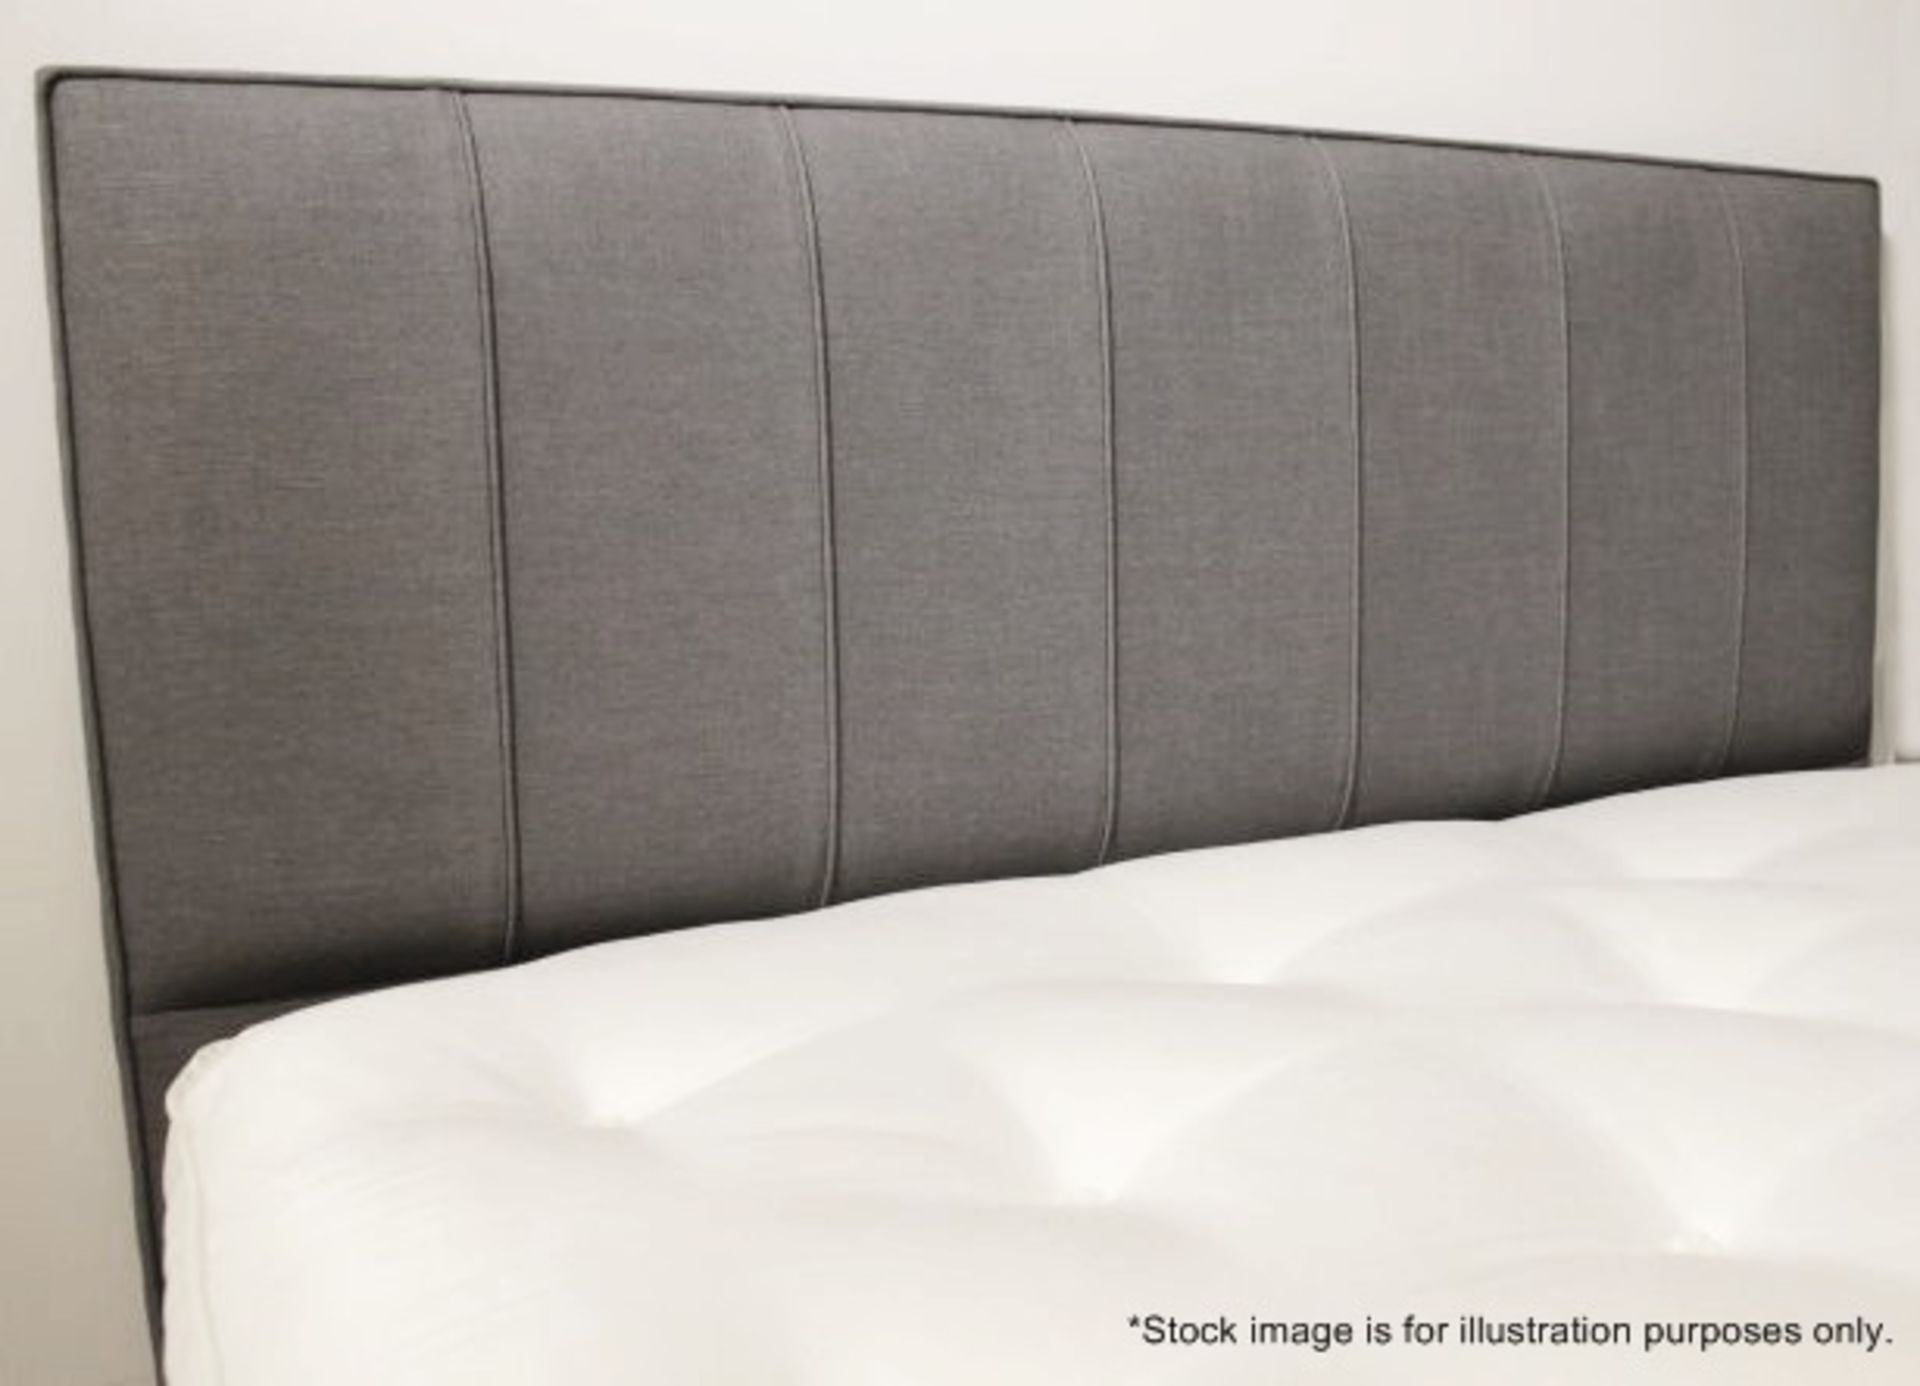 1 x VISPRING 'Hera' Luxury Handcrafted Double Headboard In A Grey Faux Suede - British Made